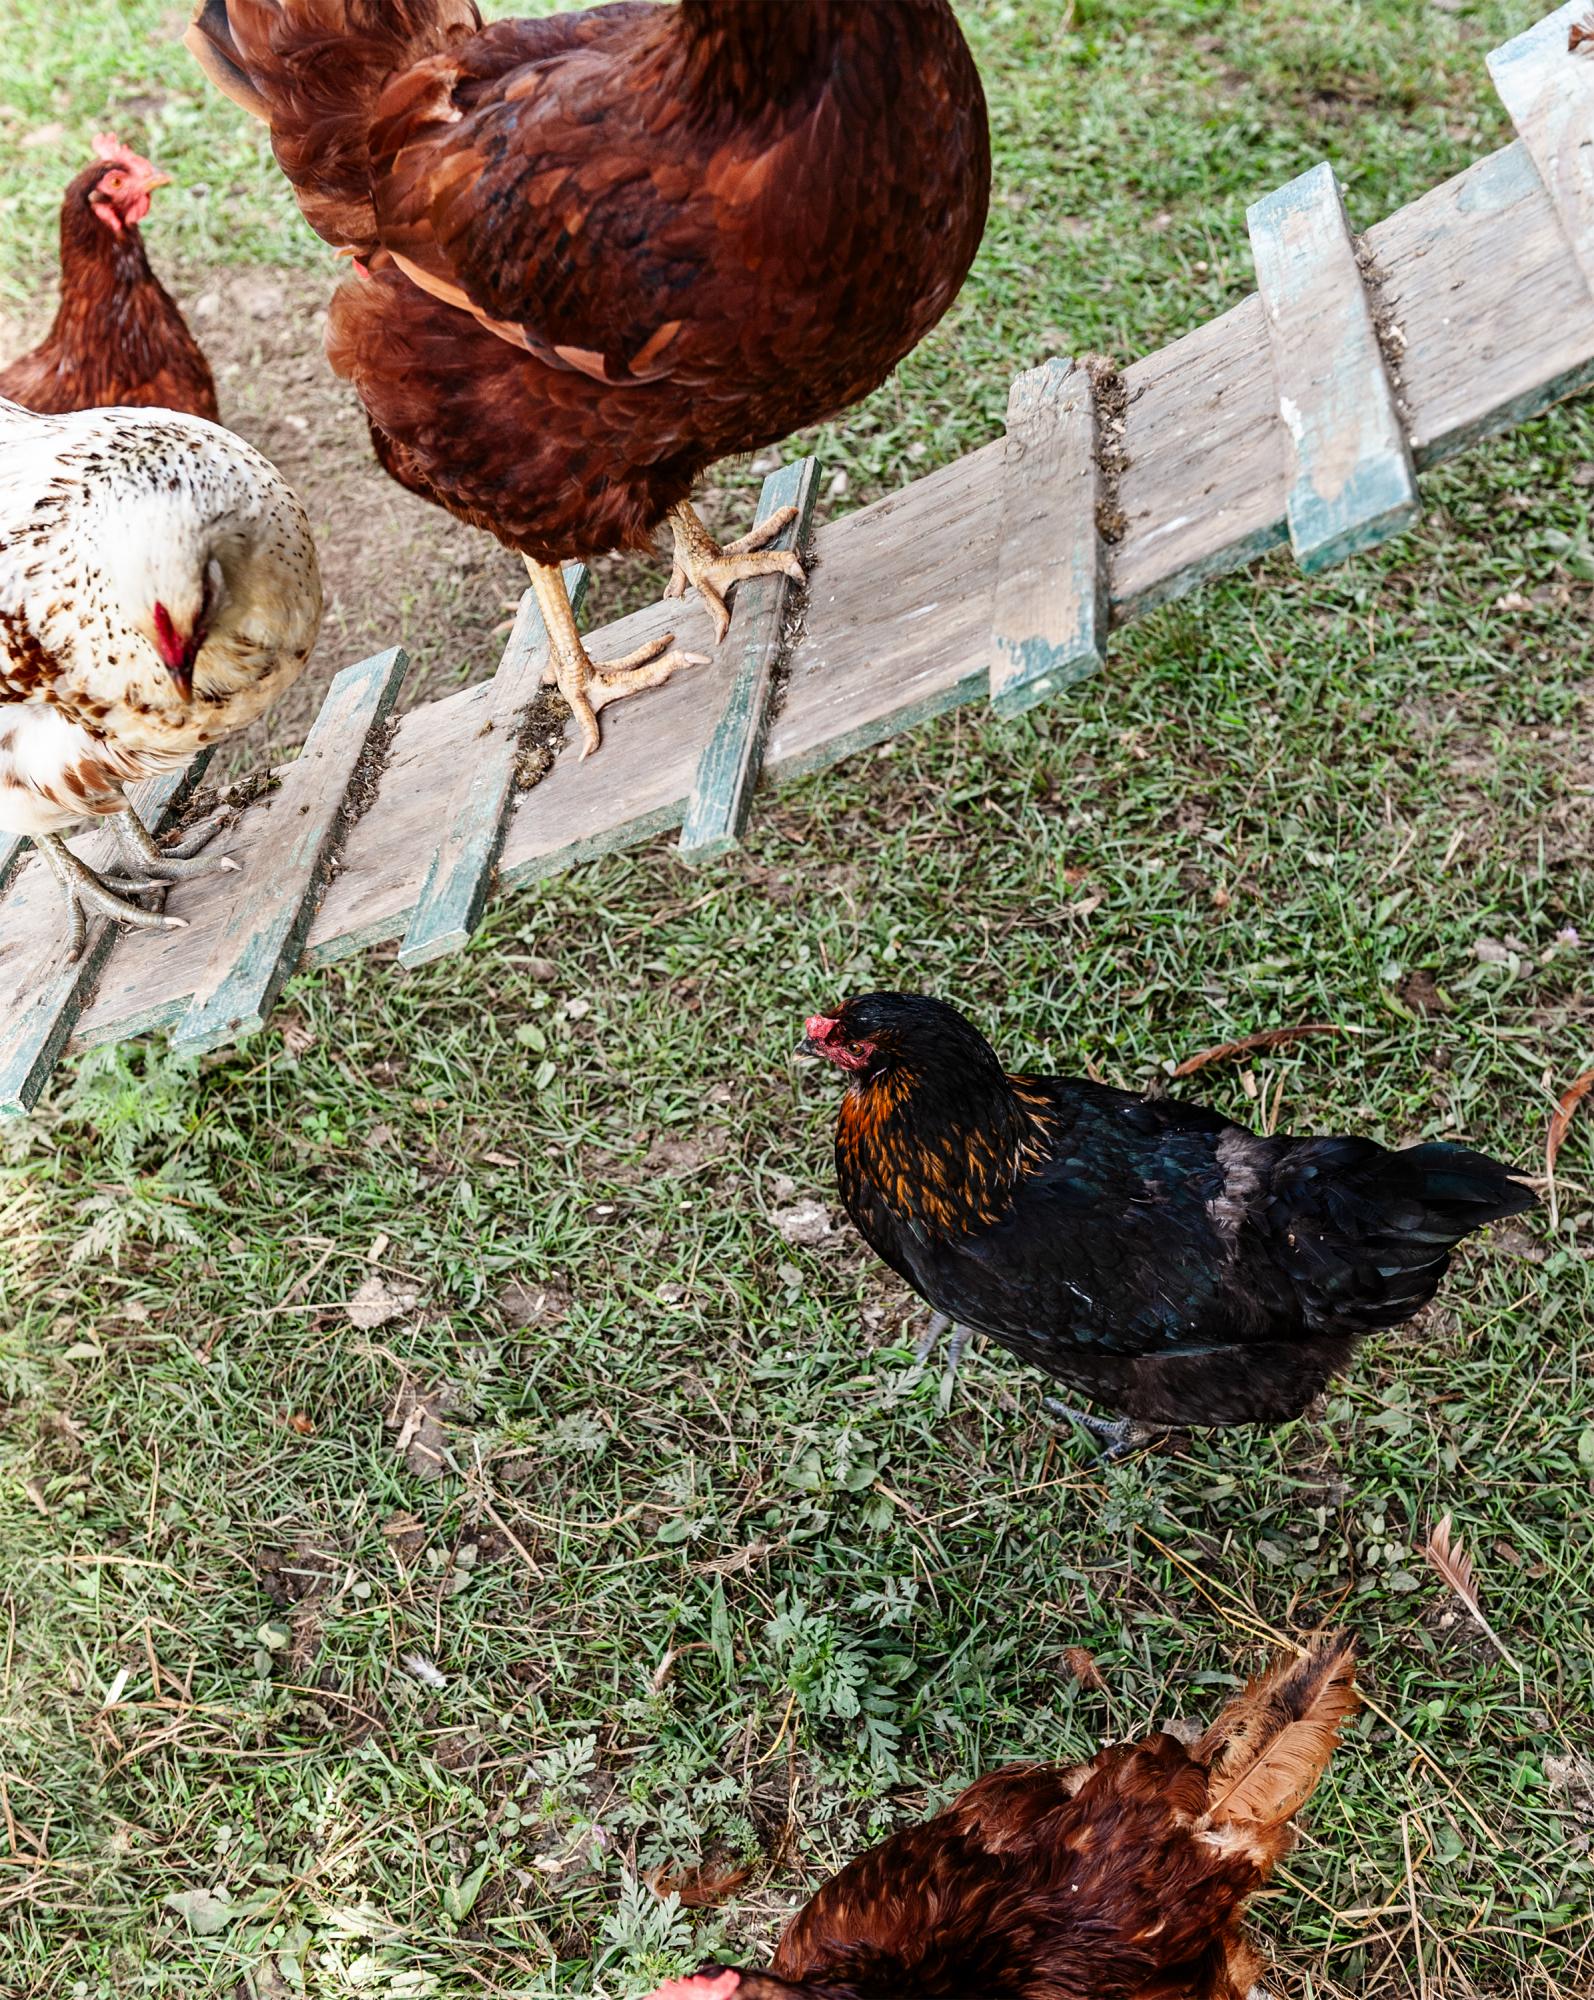 Considered - Chickens roam freely from pasture to coop.